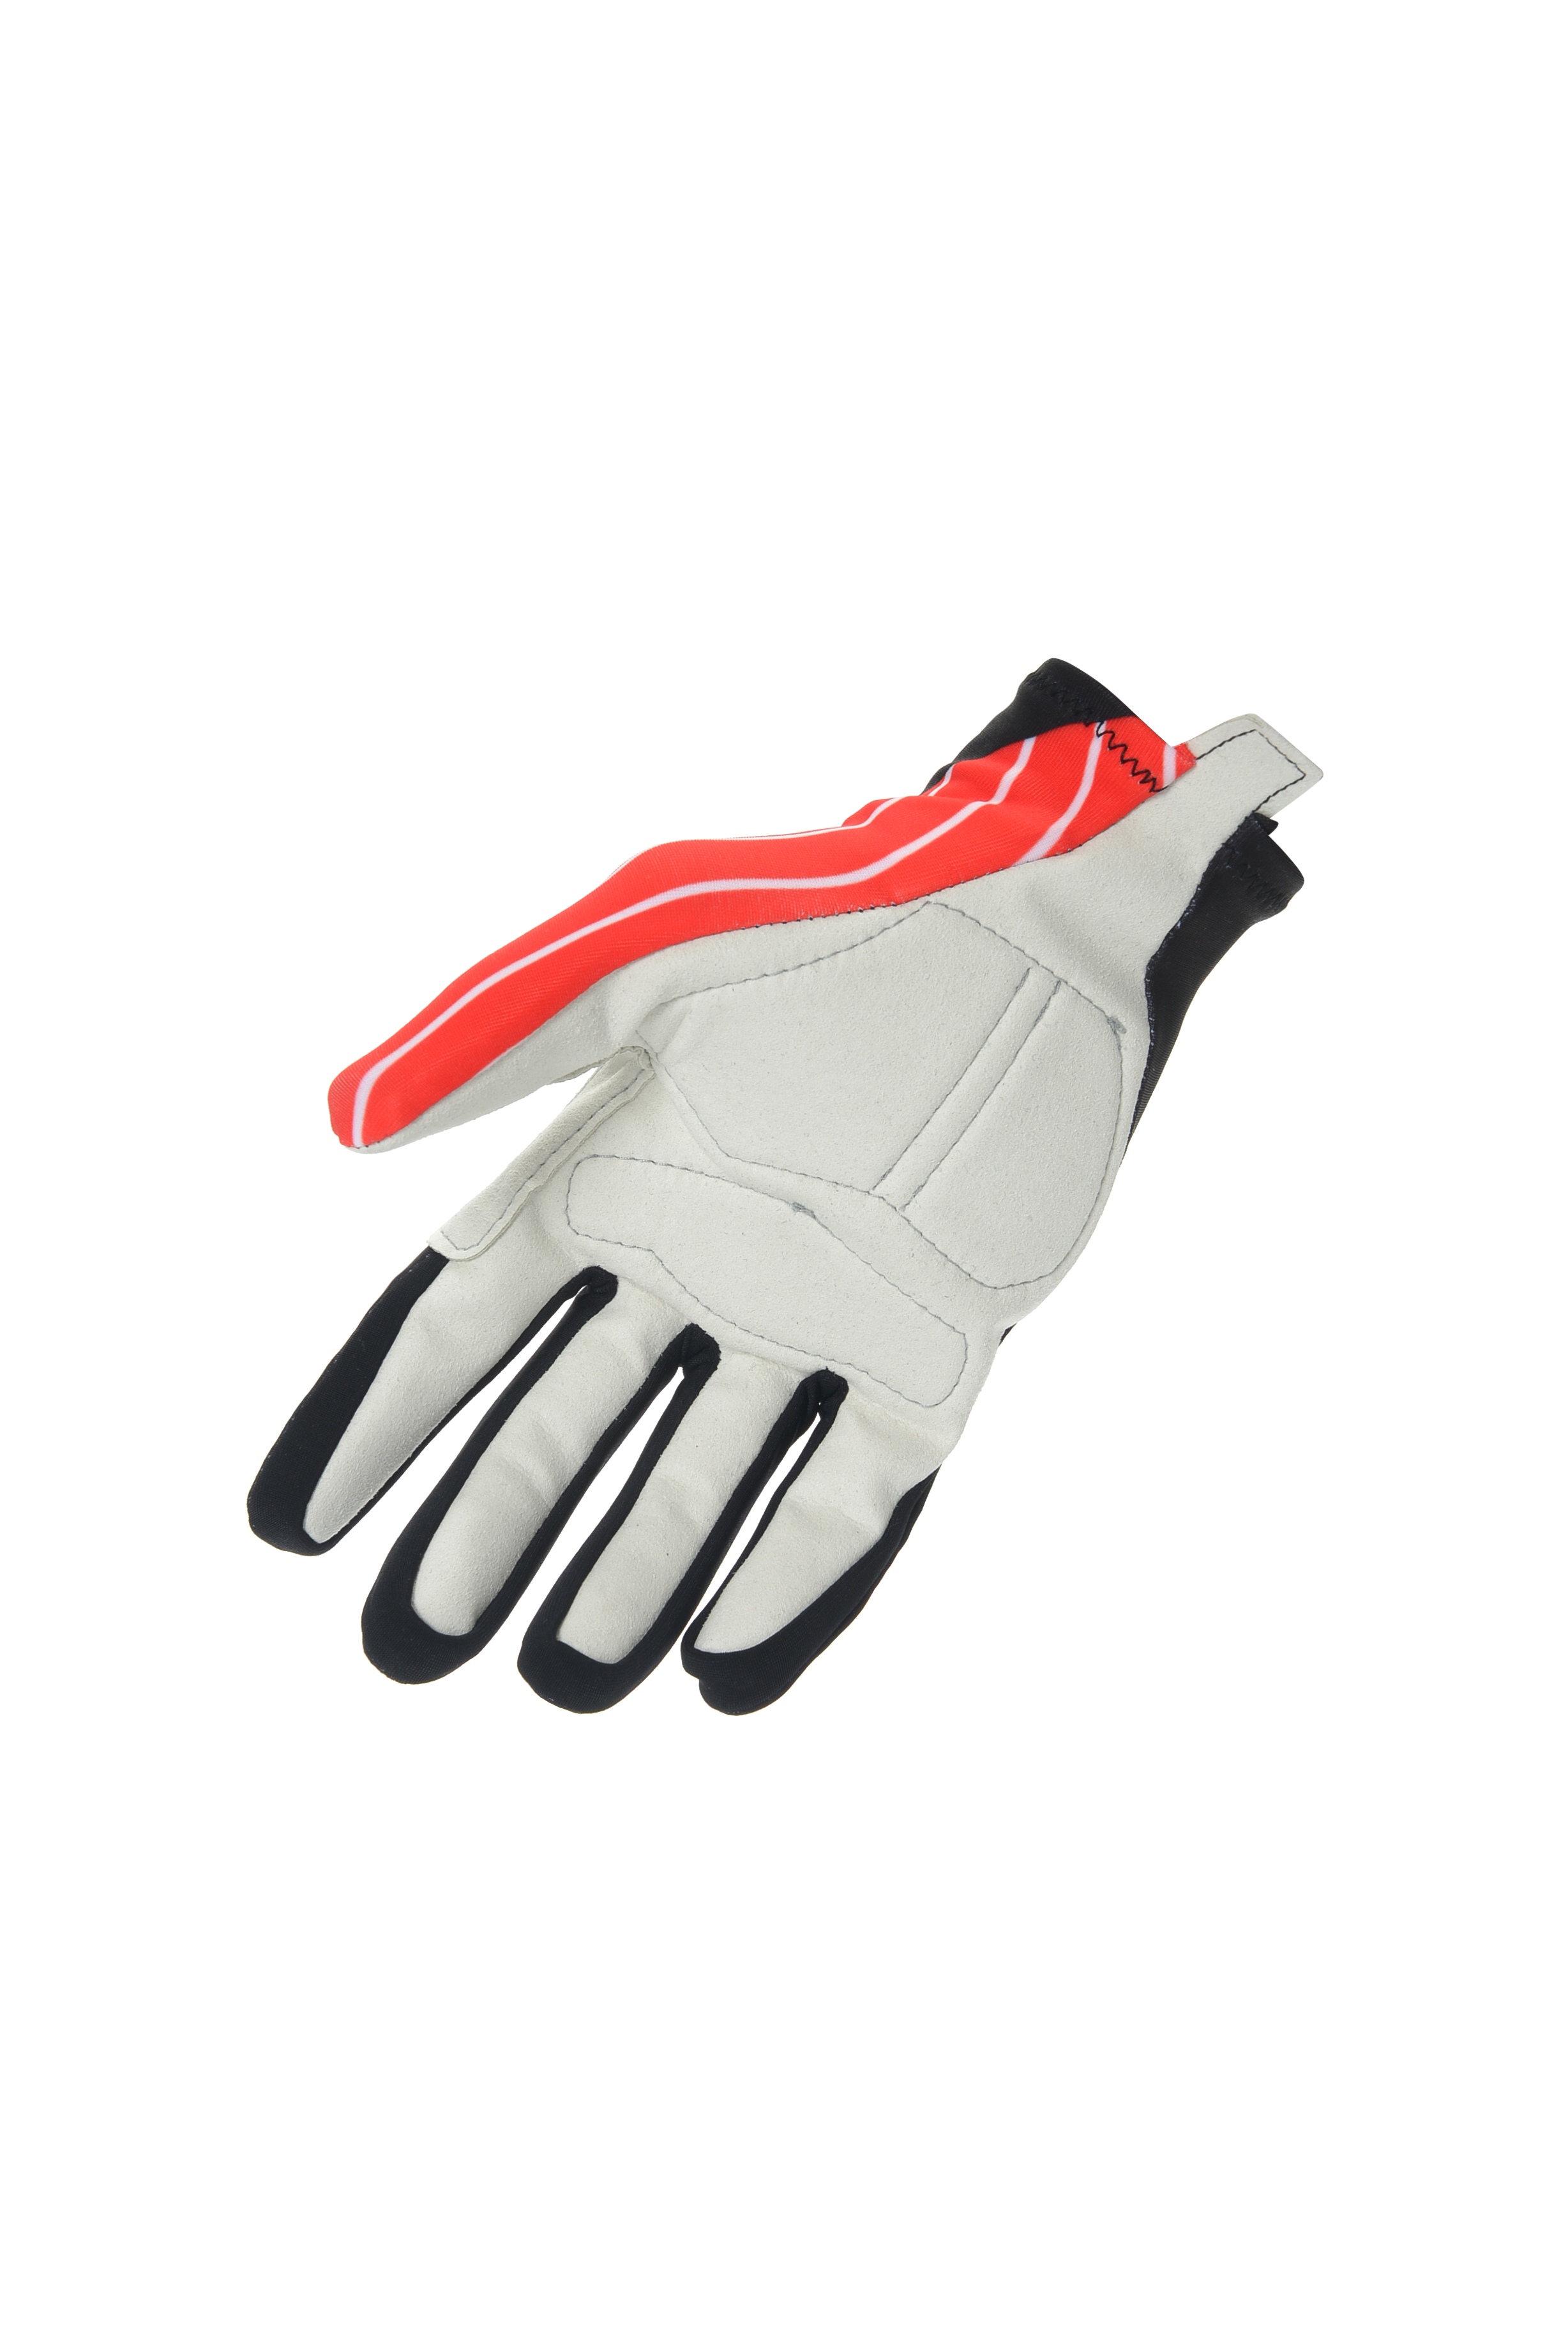 fed racing competzione gloves